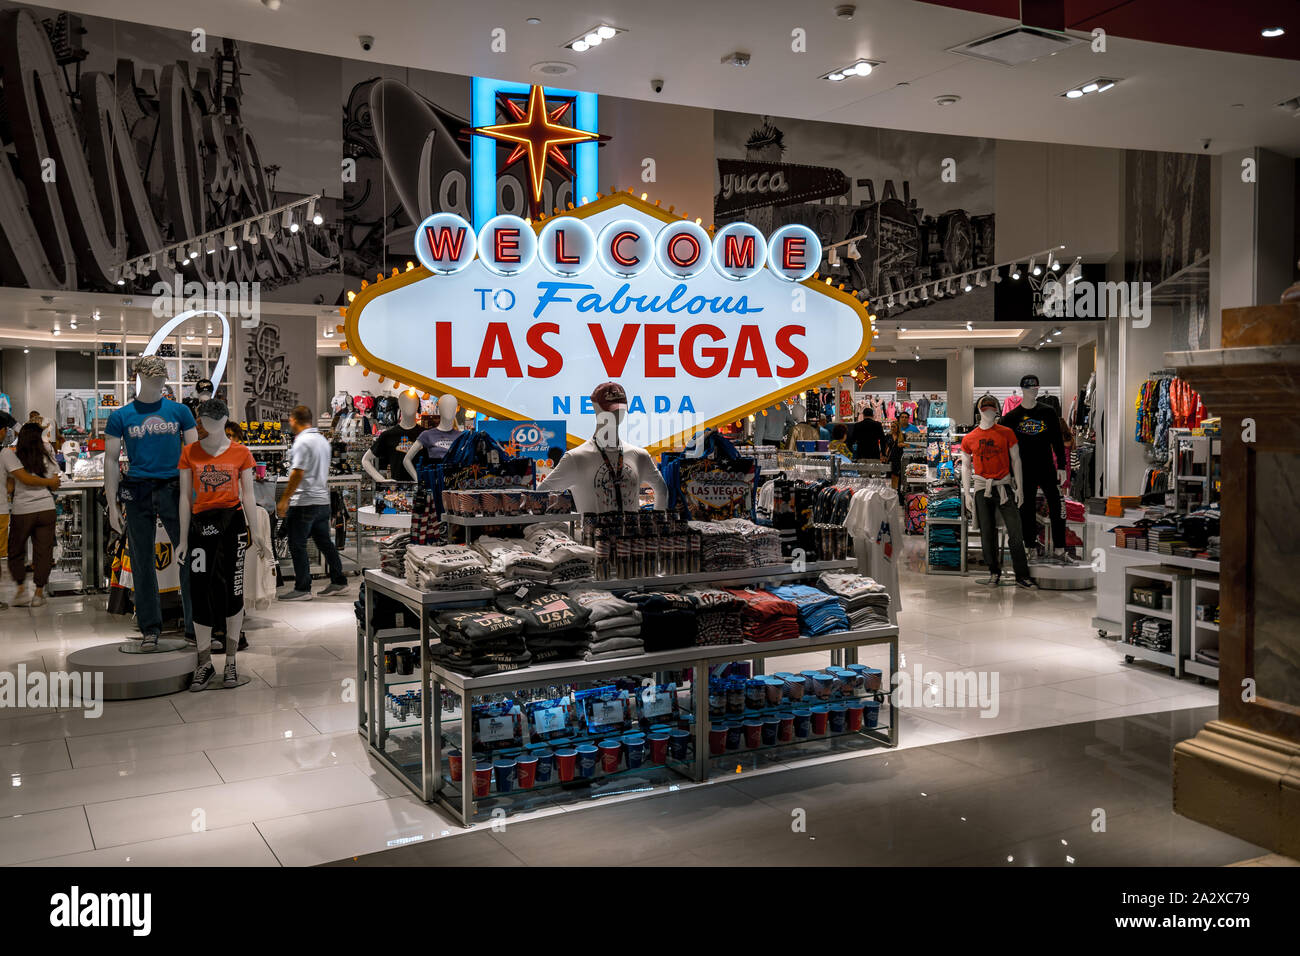 Las Vegas, Nevada, USA - Souvenirs shop with Welcome to Las Vegas sign at  the front Stock Photo - Alamy